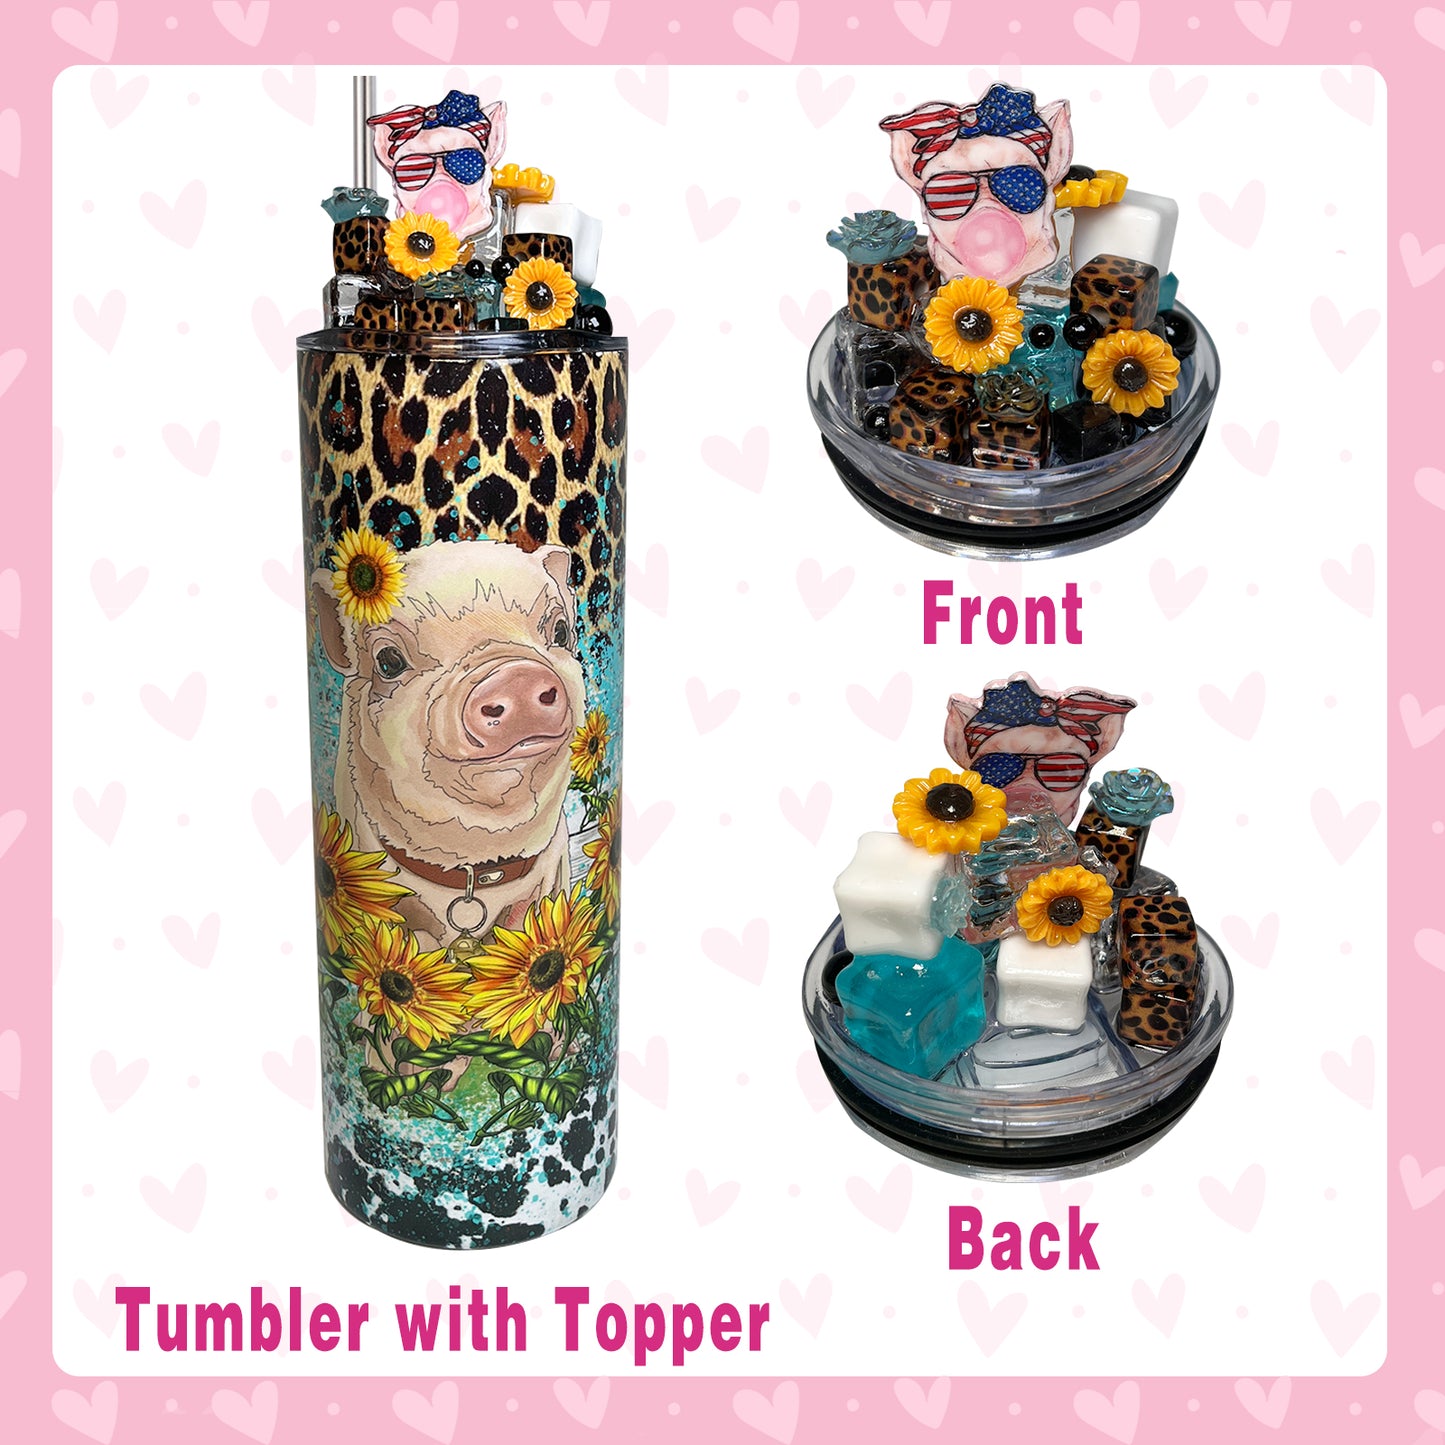 Year-end Hot Sale - Tumbler with Topper - Buy 2 Get 10% Extra Off&Free Shipping